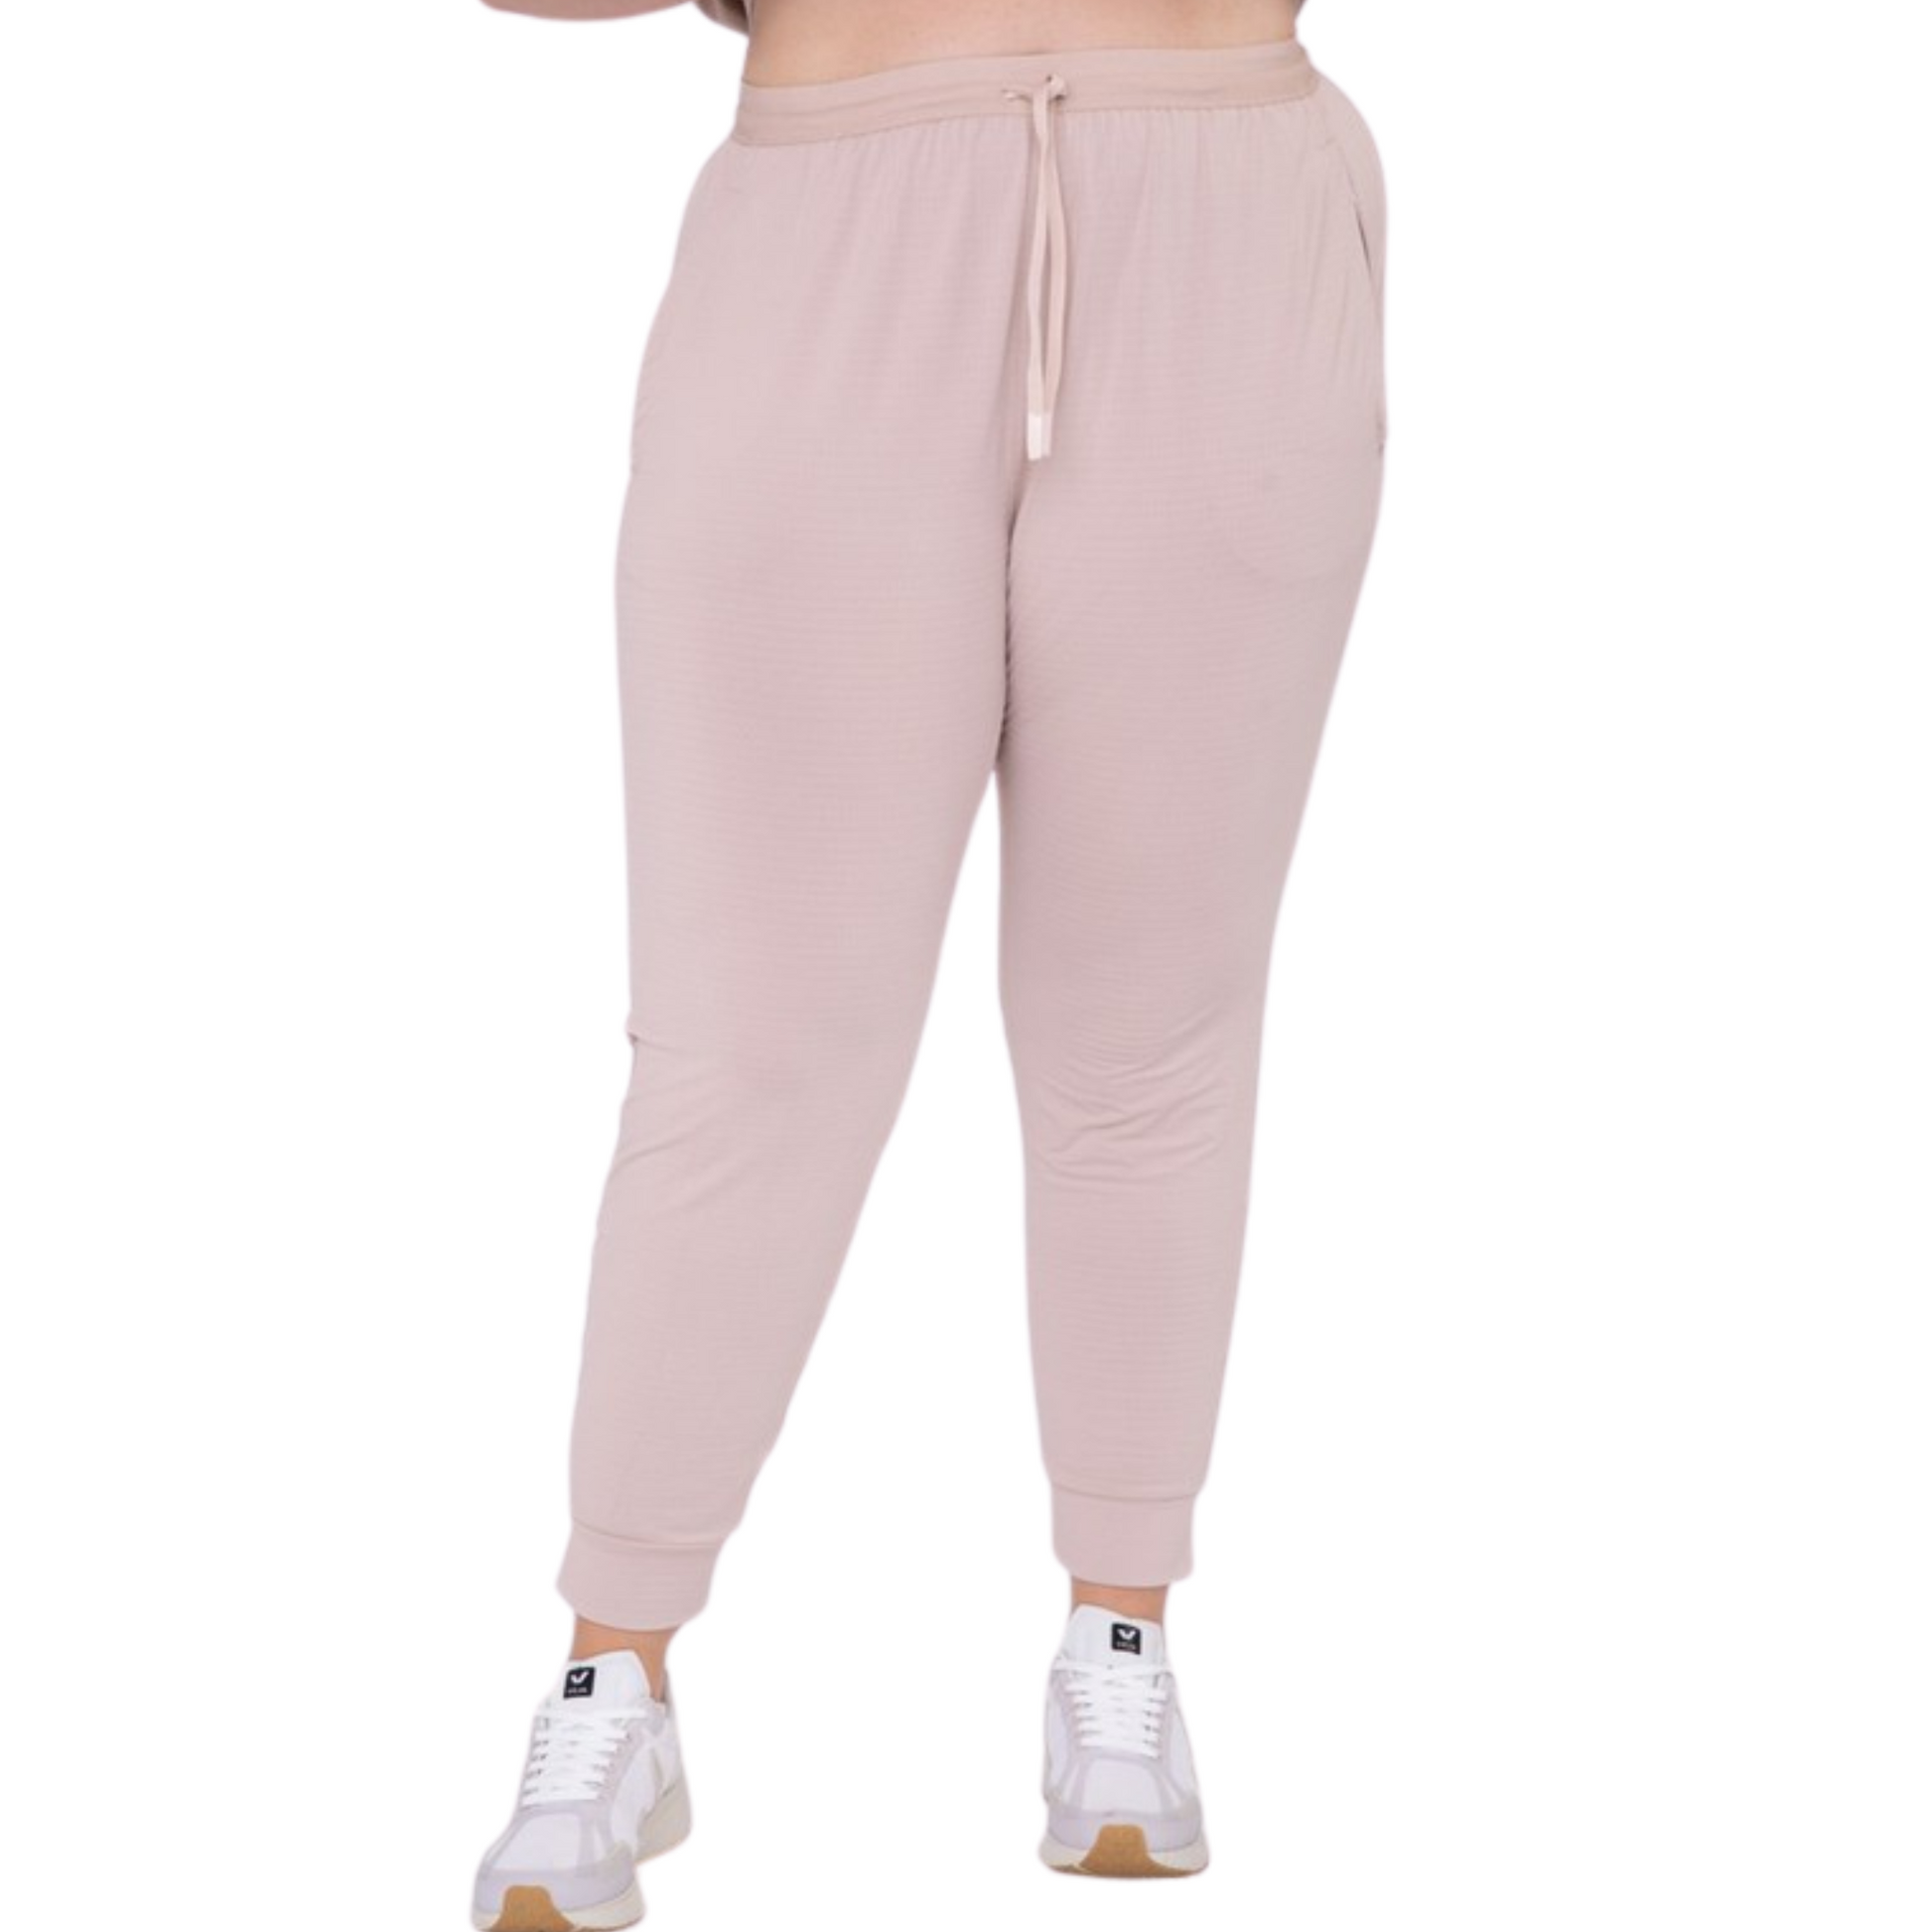 These joggers are made with a solid knit and textured interior, providing optimal airflow and comfort. The adjustable drawstring waistband and cuffed hems provide a custom fit, and the zipper pockets keep your essentials secure. Perfect for any active lifestyle, from jogging to lounging.